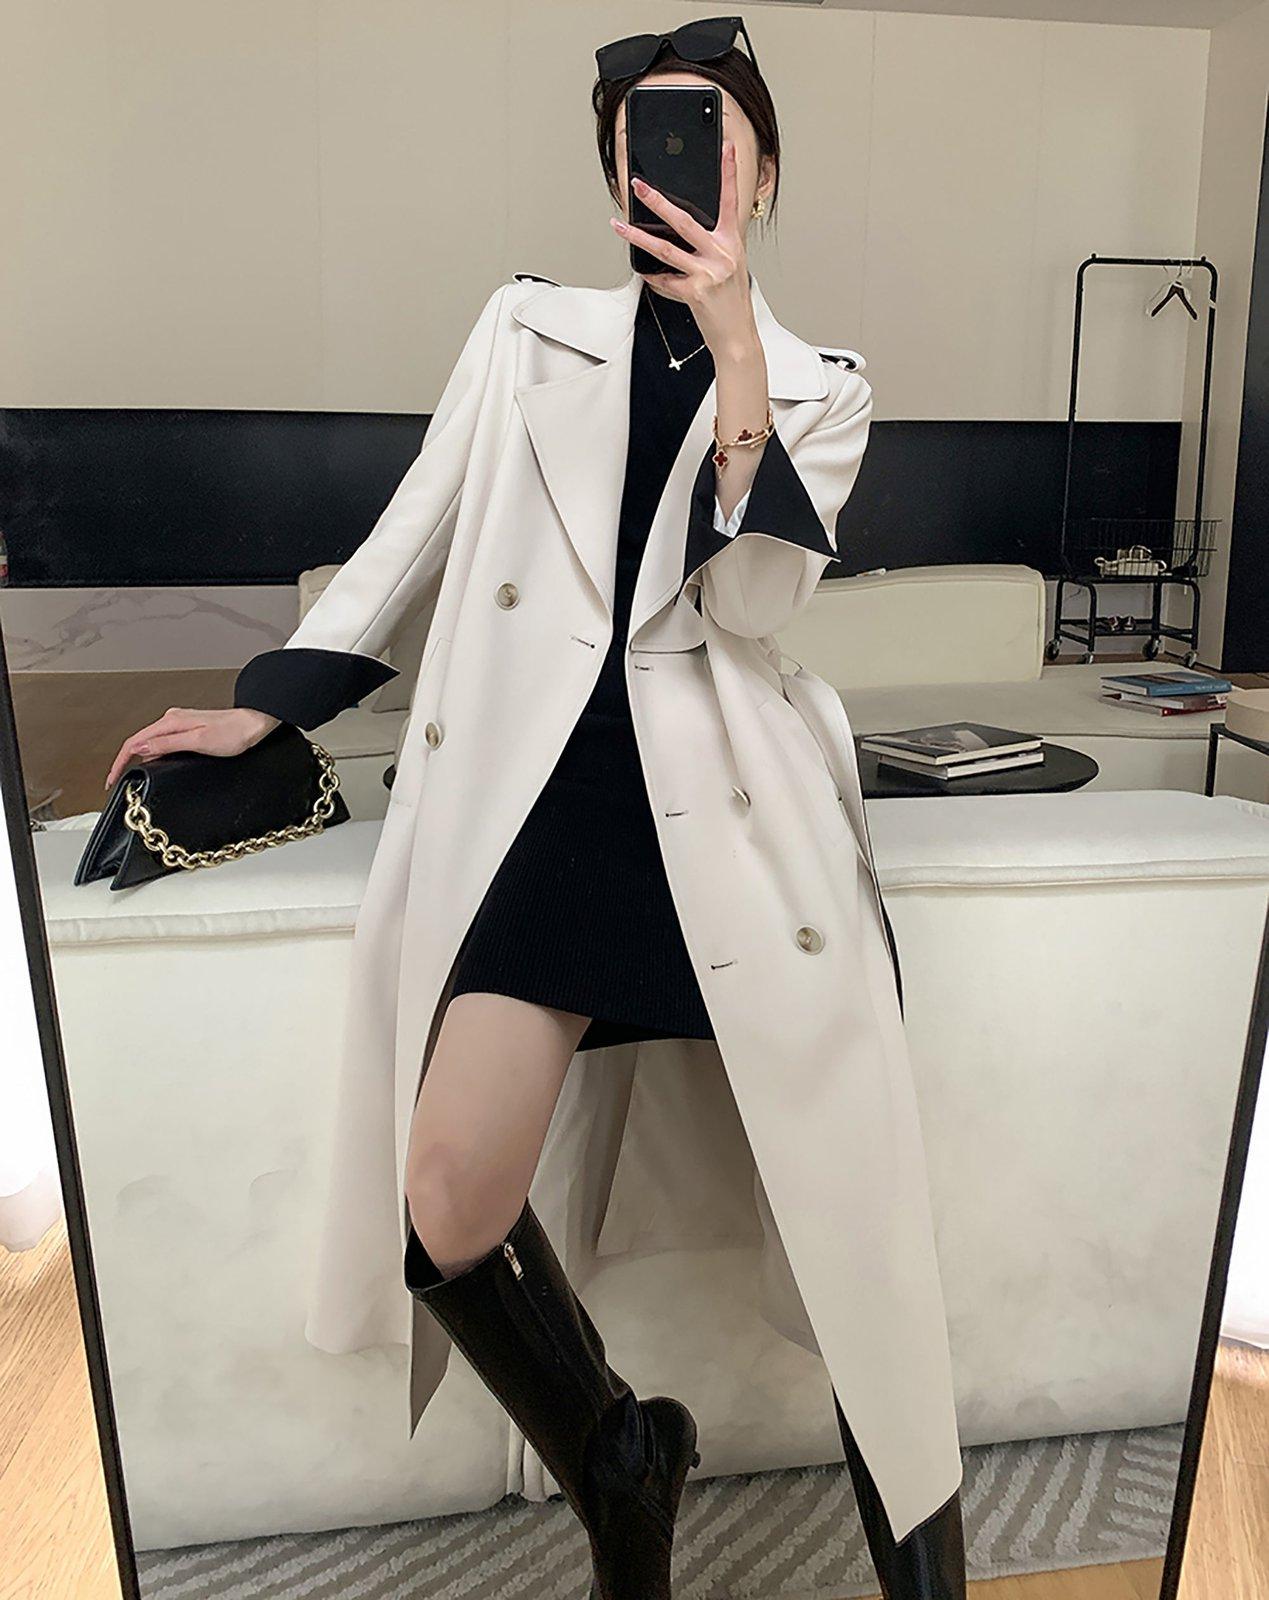 Beige Belted Two-Tone Trench Coat